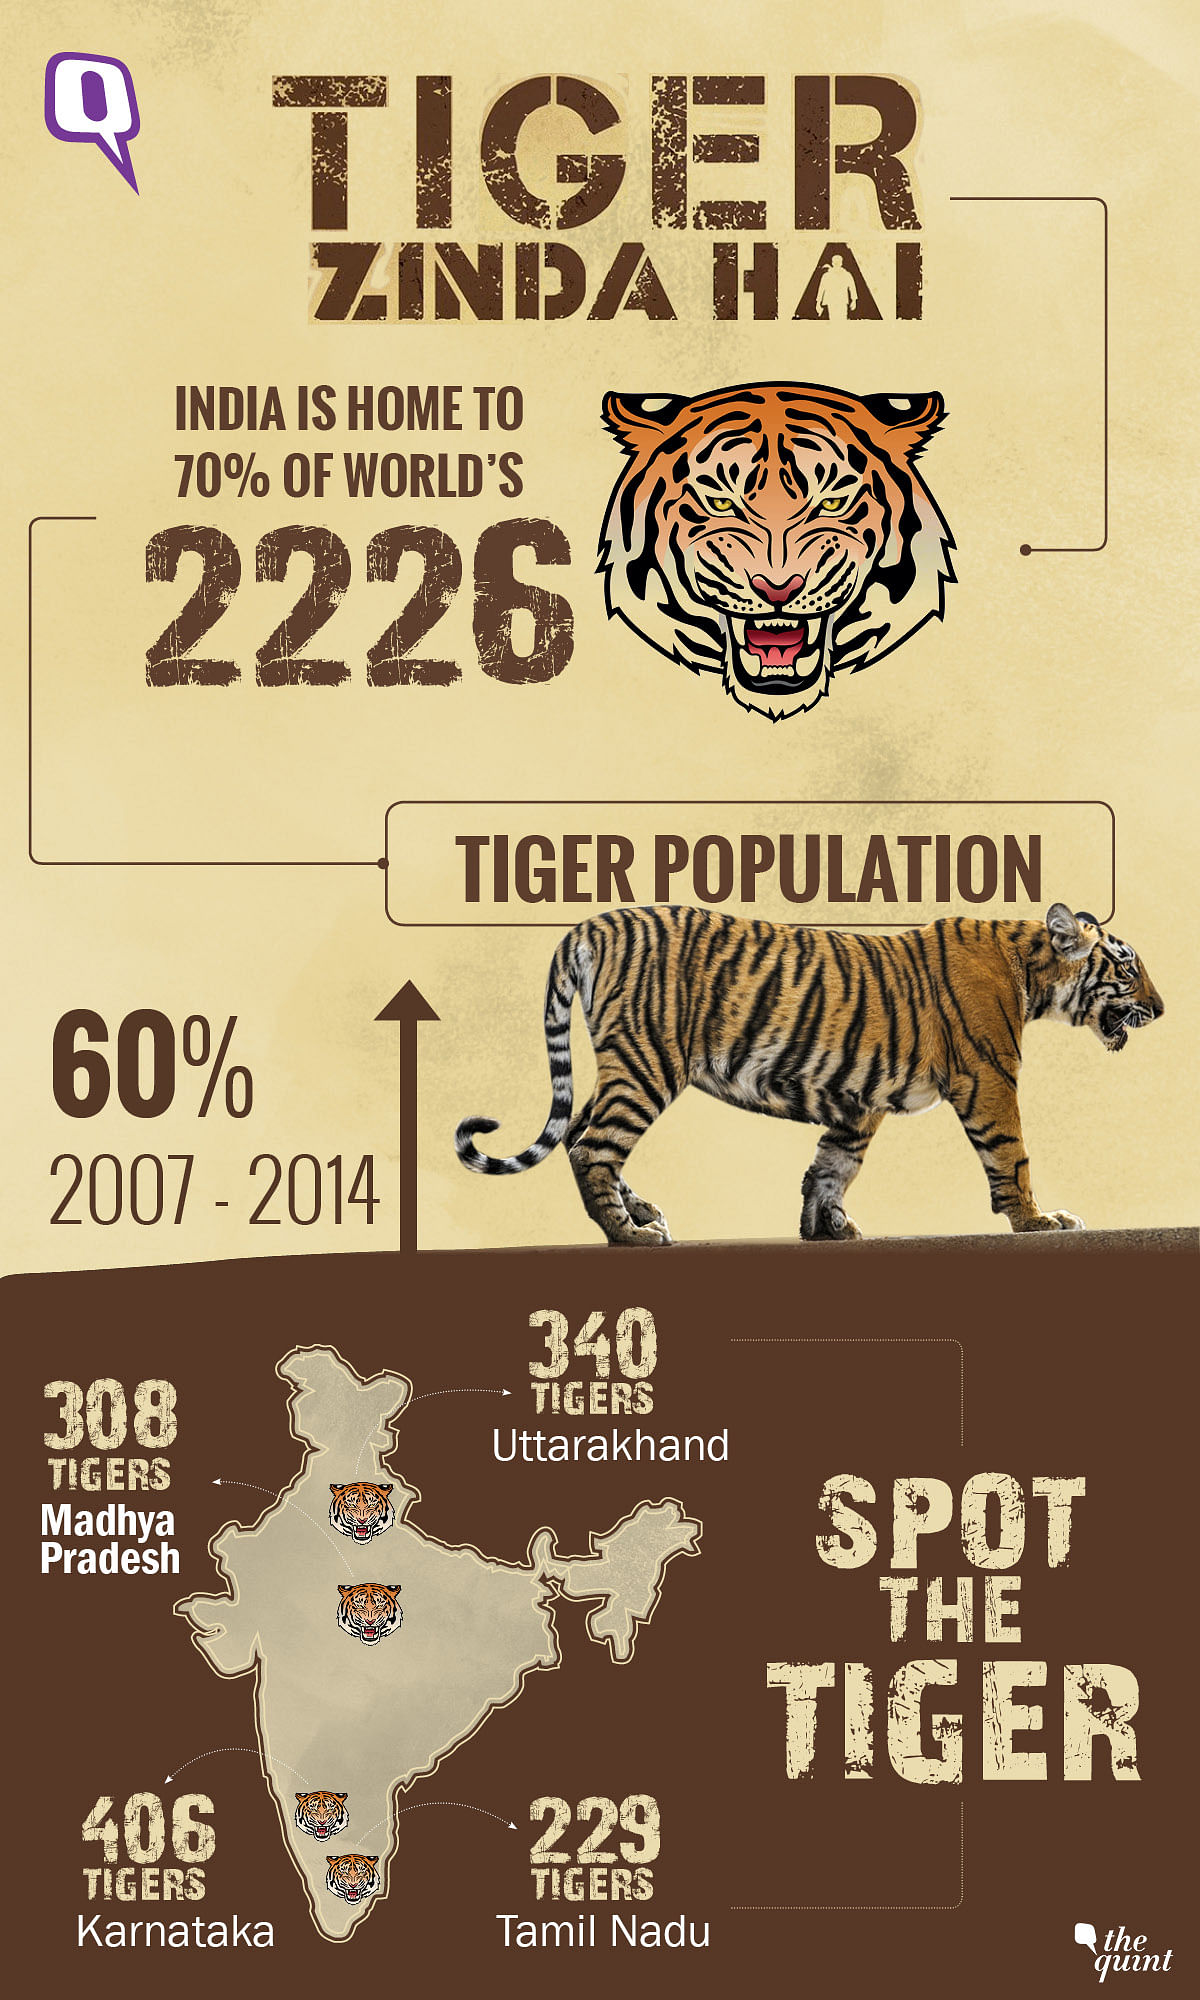 As Salman Khan comes alive in ‘Tiger Zinda Hai’, we tell you how India is home to 70 percent of the world’s tigers.